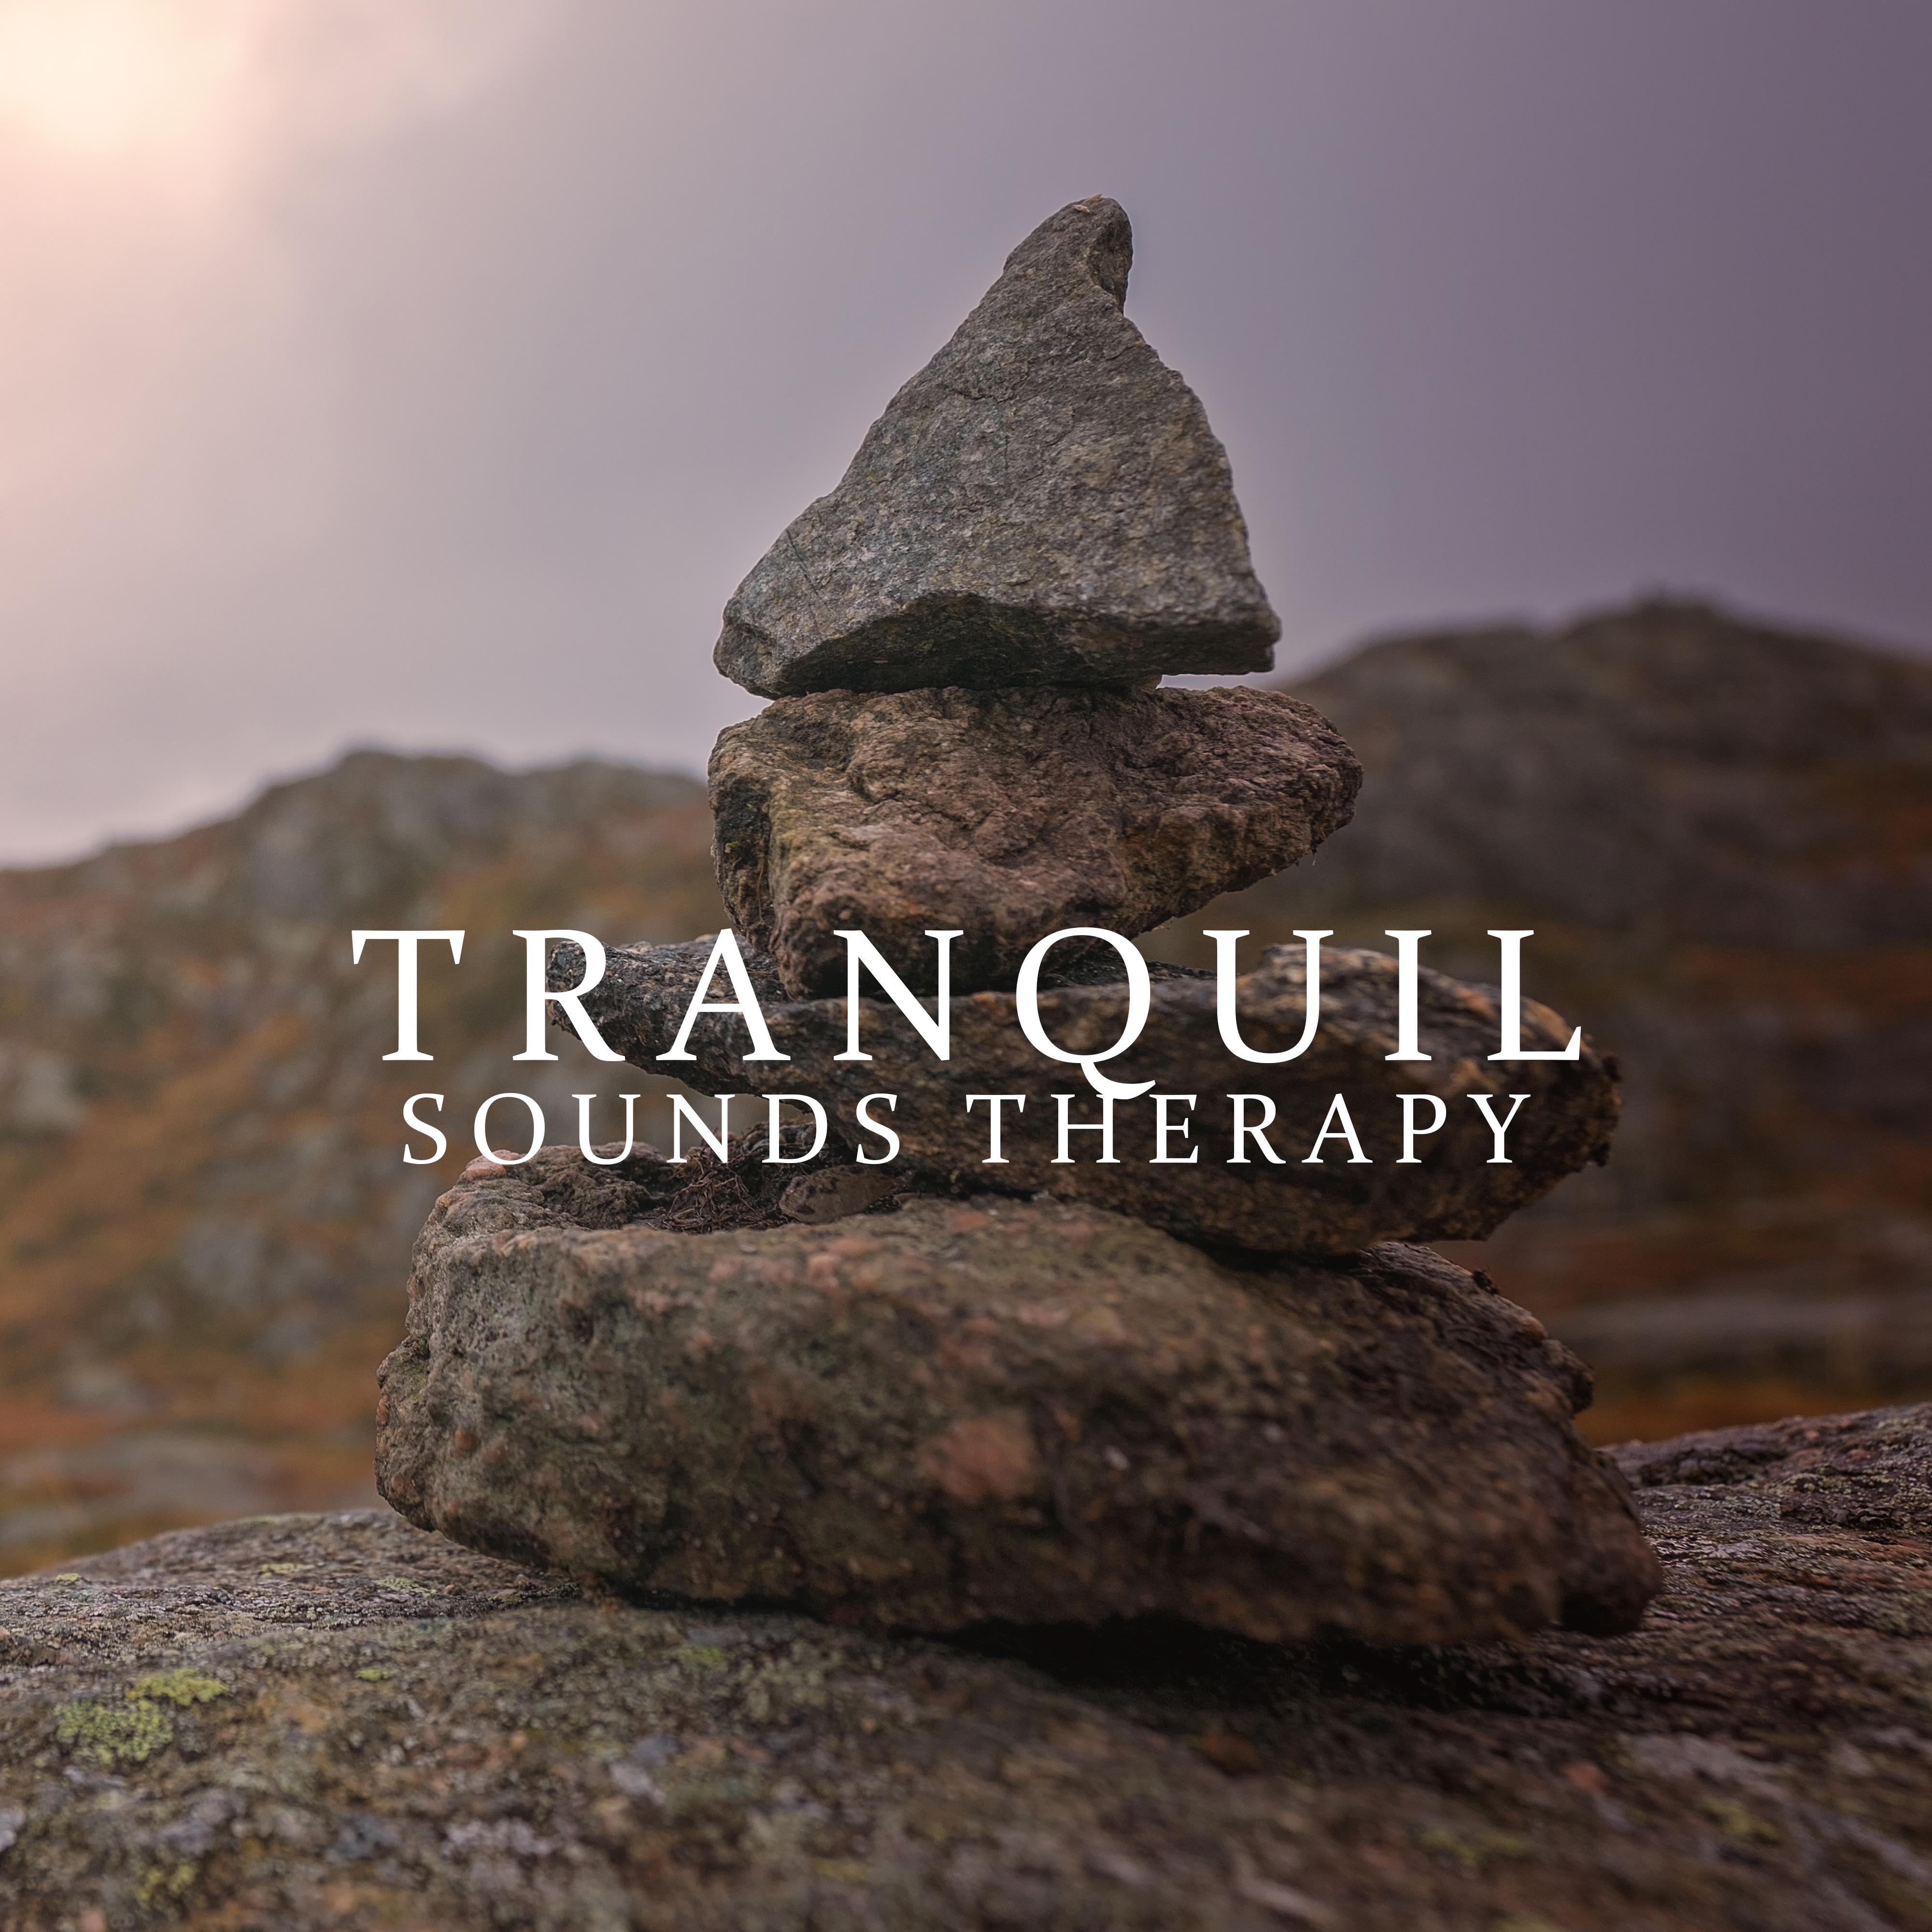 Tranquil Sounds Therapy